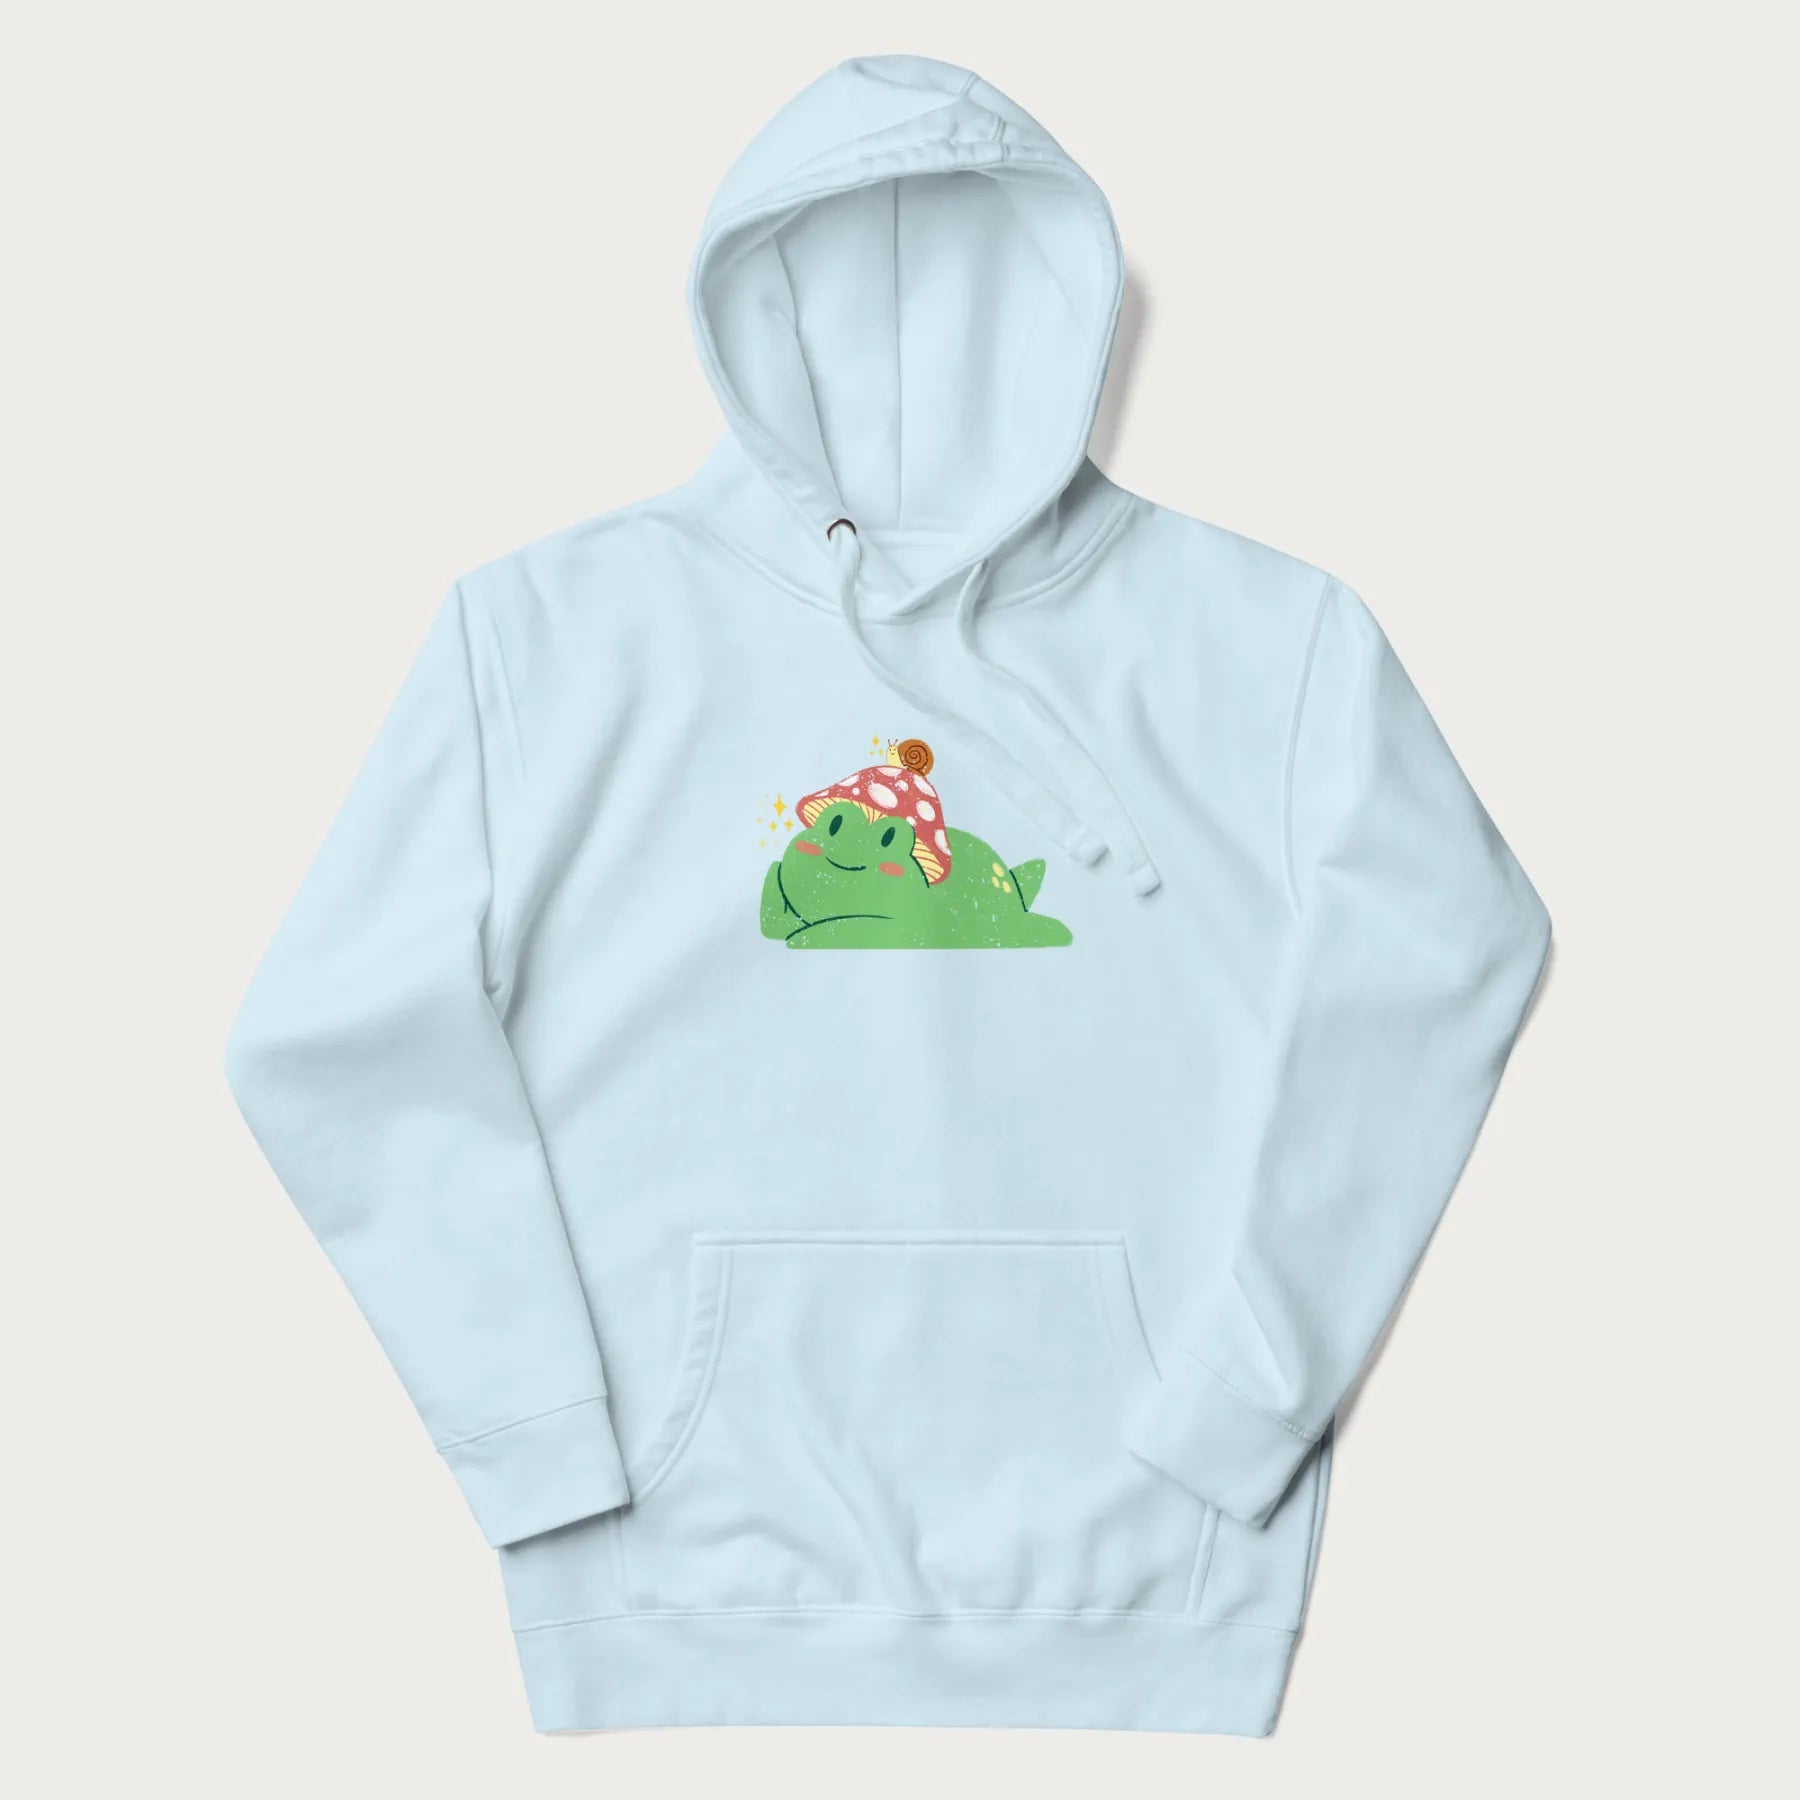 Light blue hoodie with a cottagecore design of a green frog wearing a mushroom cap and a snail on top.